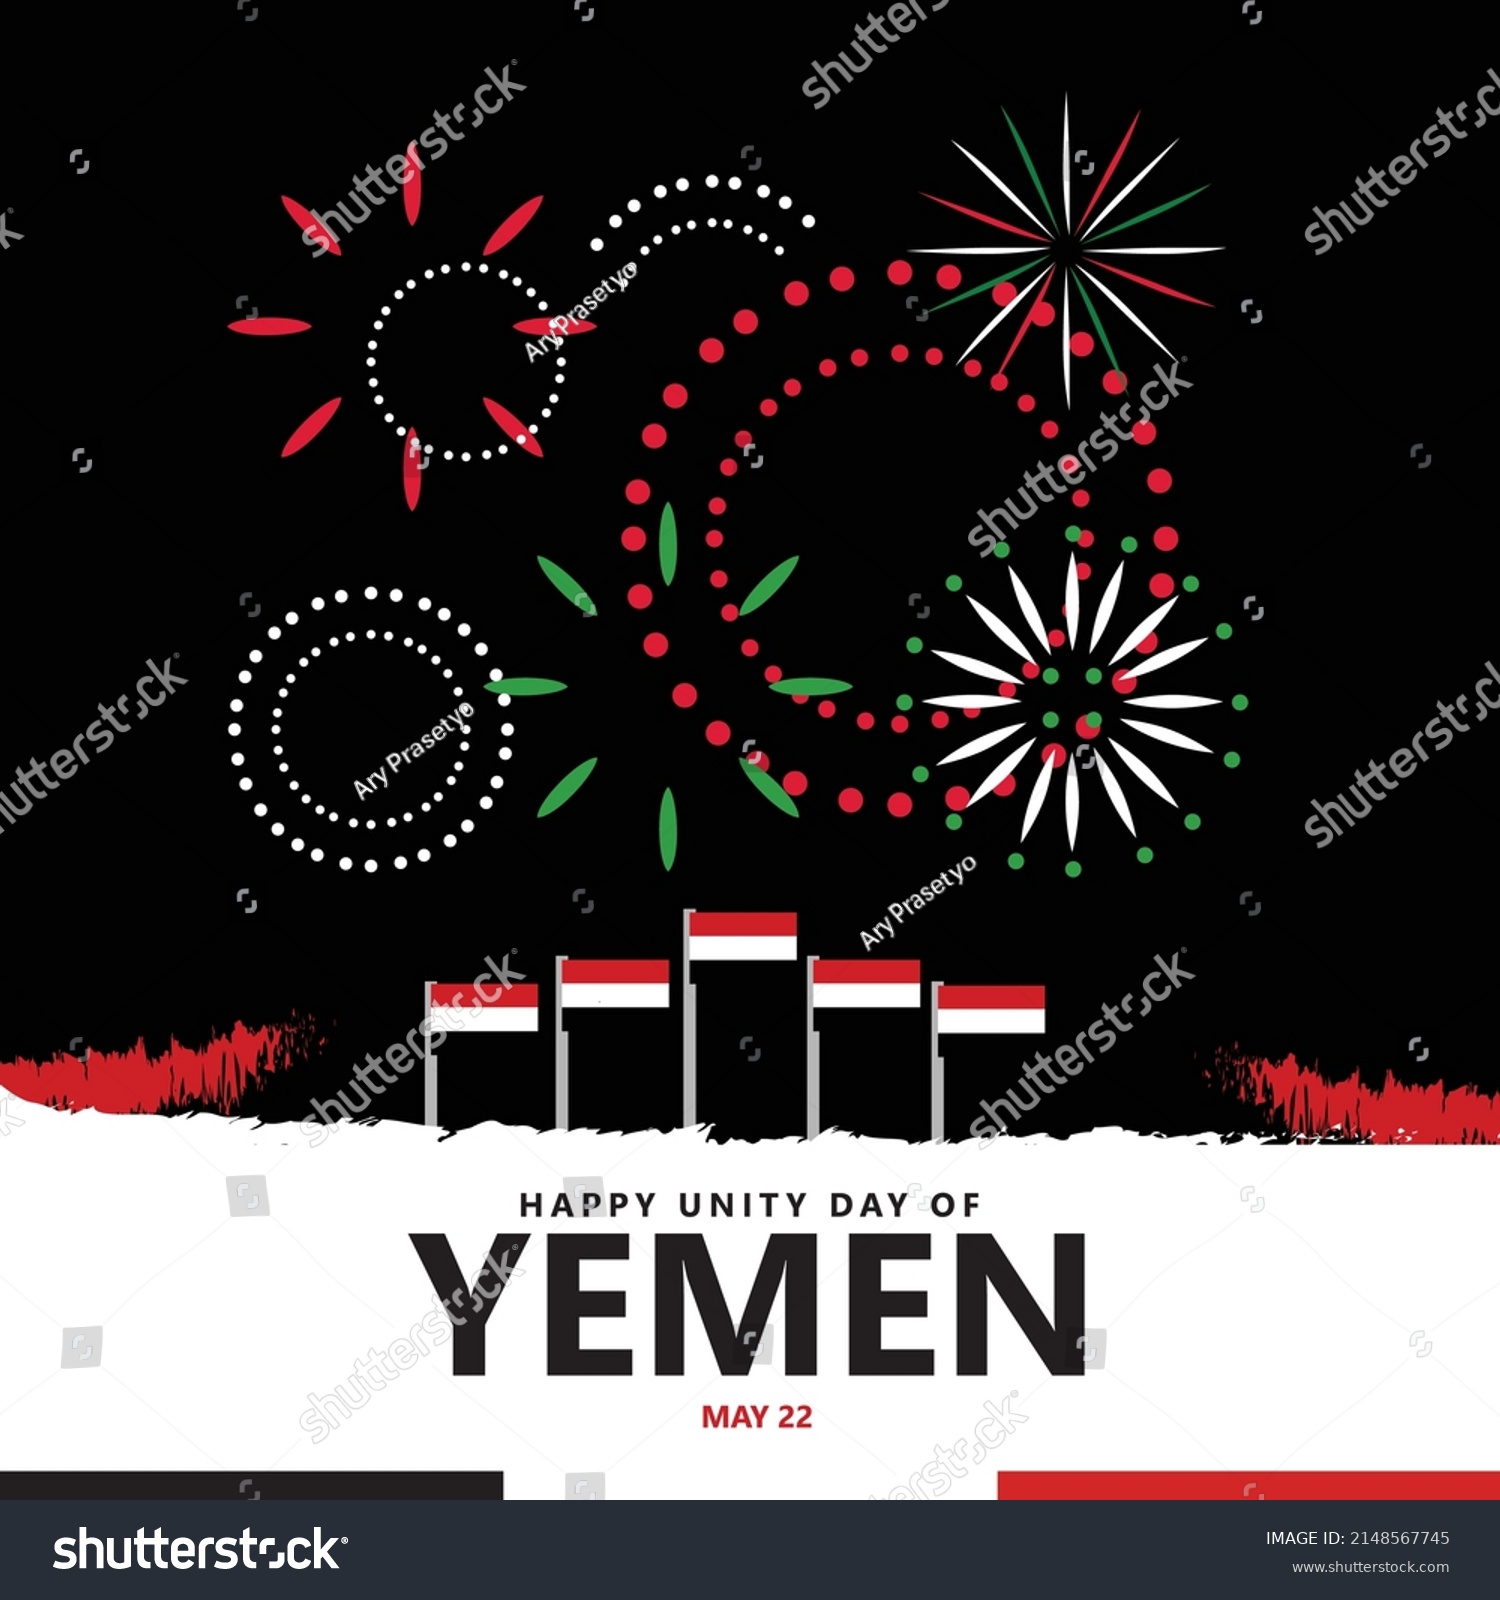 SVG of Yemen Unity Day celebration vector illustration with the national flags and fireworks. Middle East country public holiday greeting card. svg